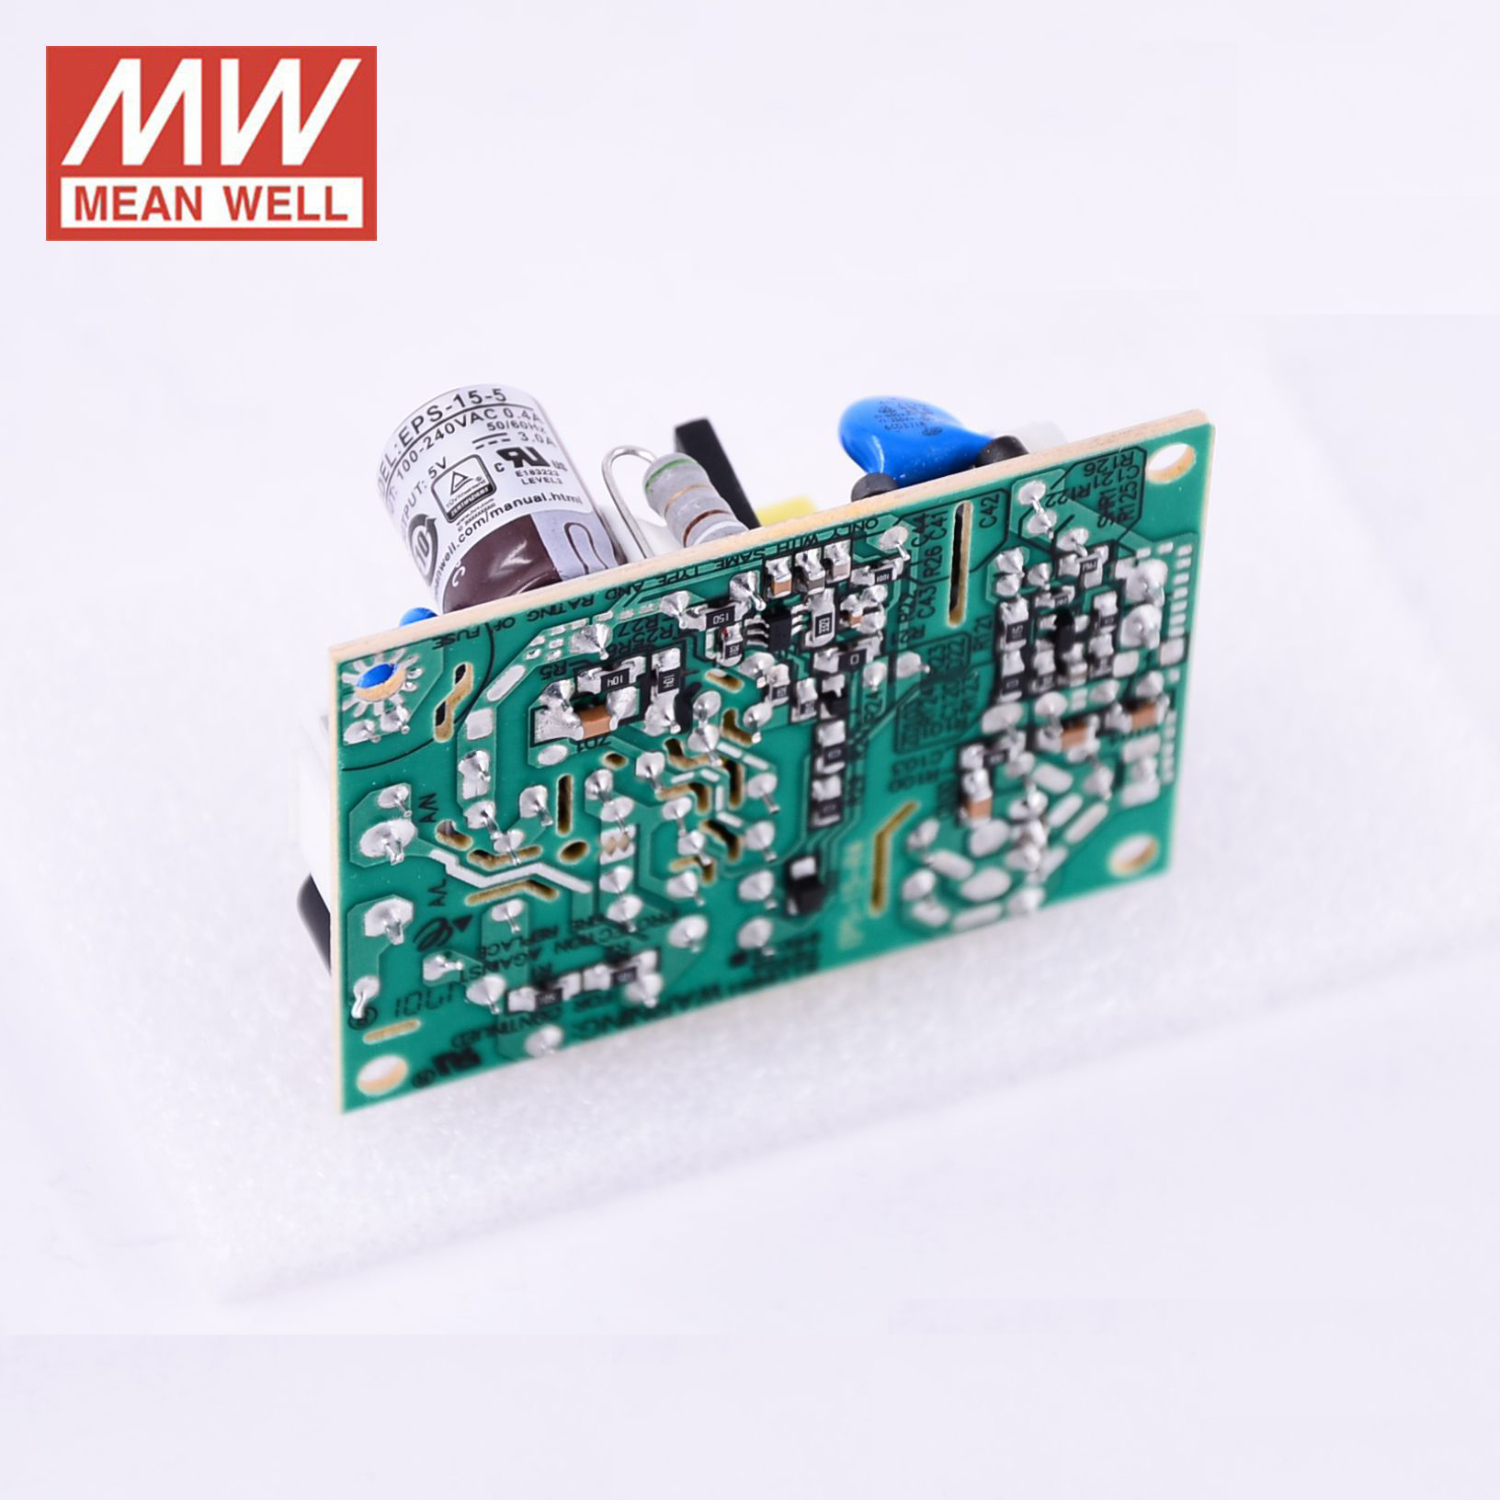 Taiwan MEAN WELL PCB Power supply EPS-15-5 15W 5V 3A Open Frame Single Output power supply Replace PS EPS-15